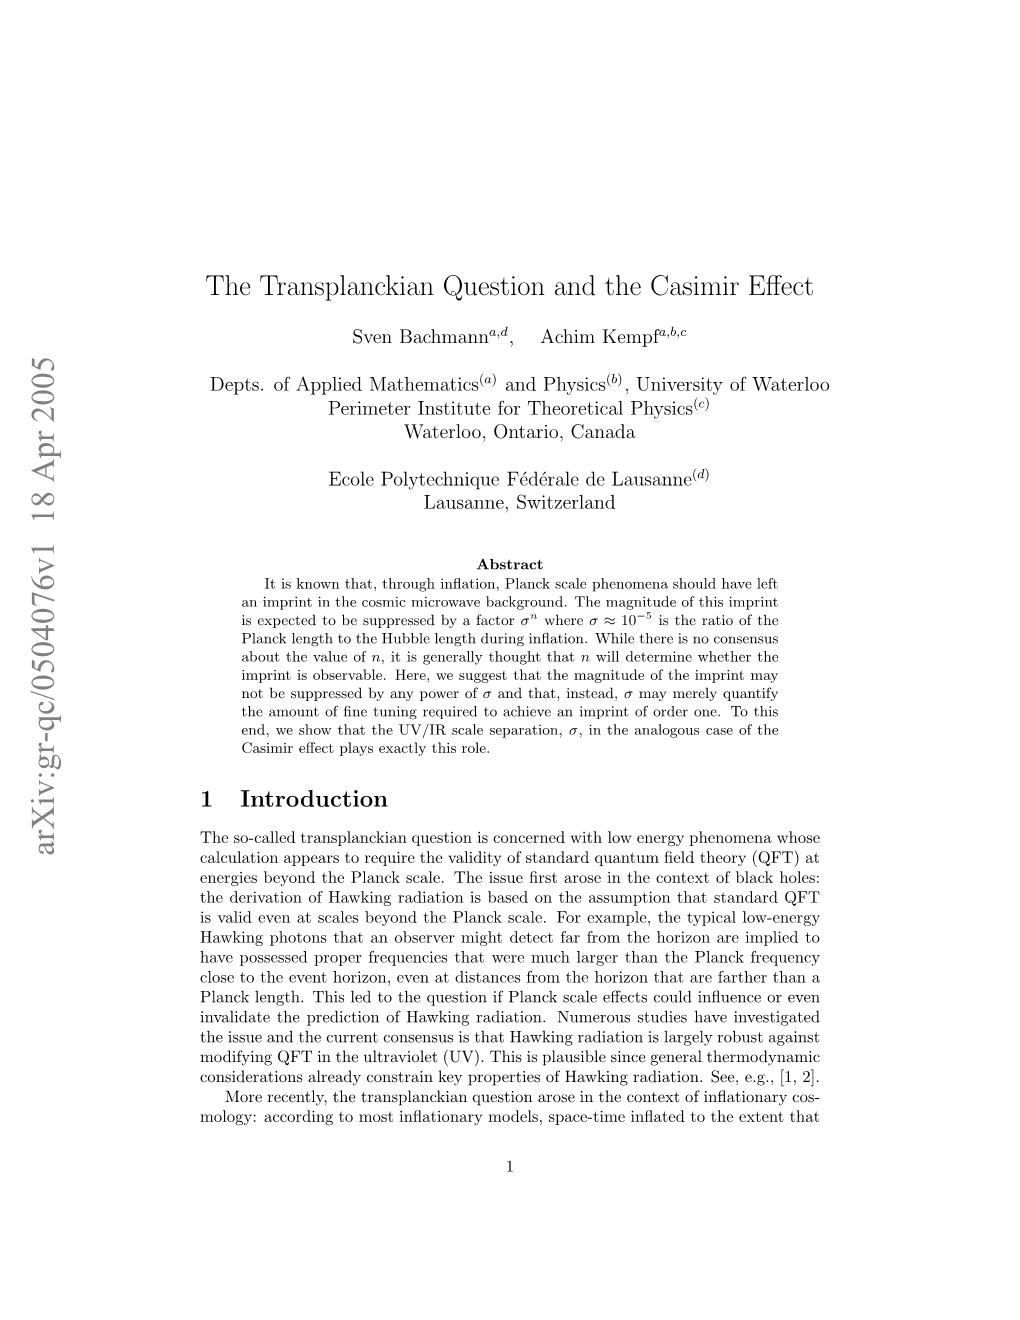 The Transplanckian Question and the Casimir Effect